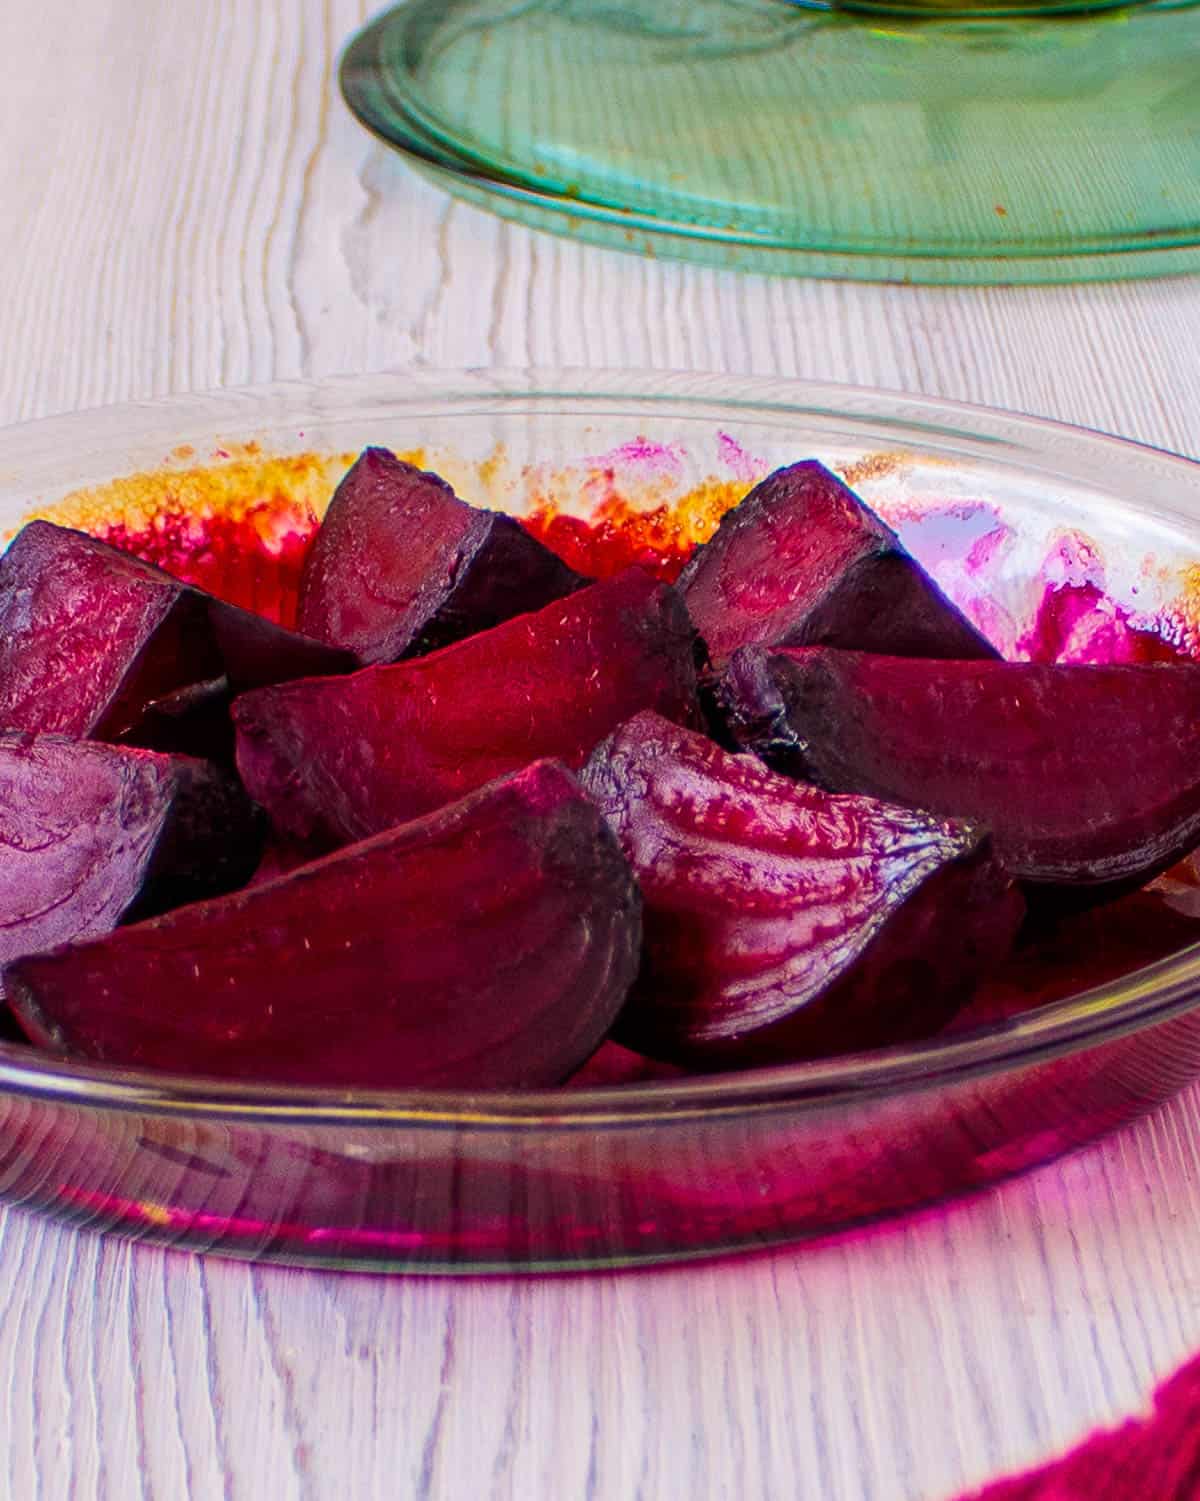 Oven roasted beets.